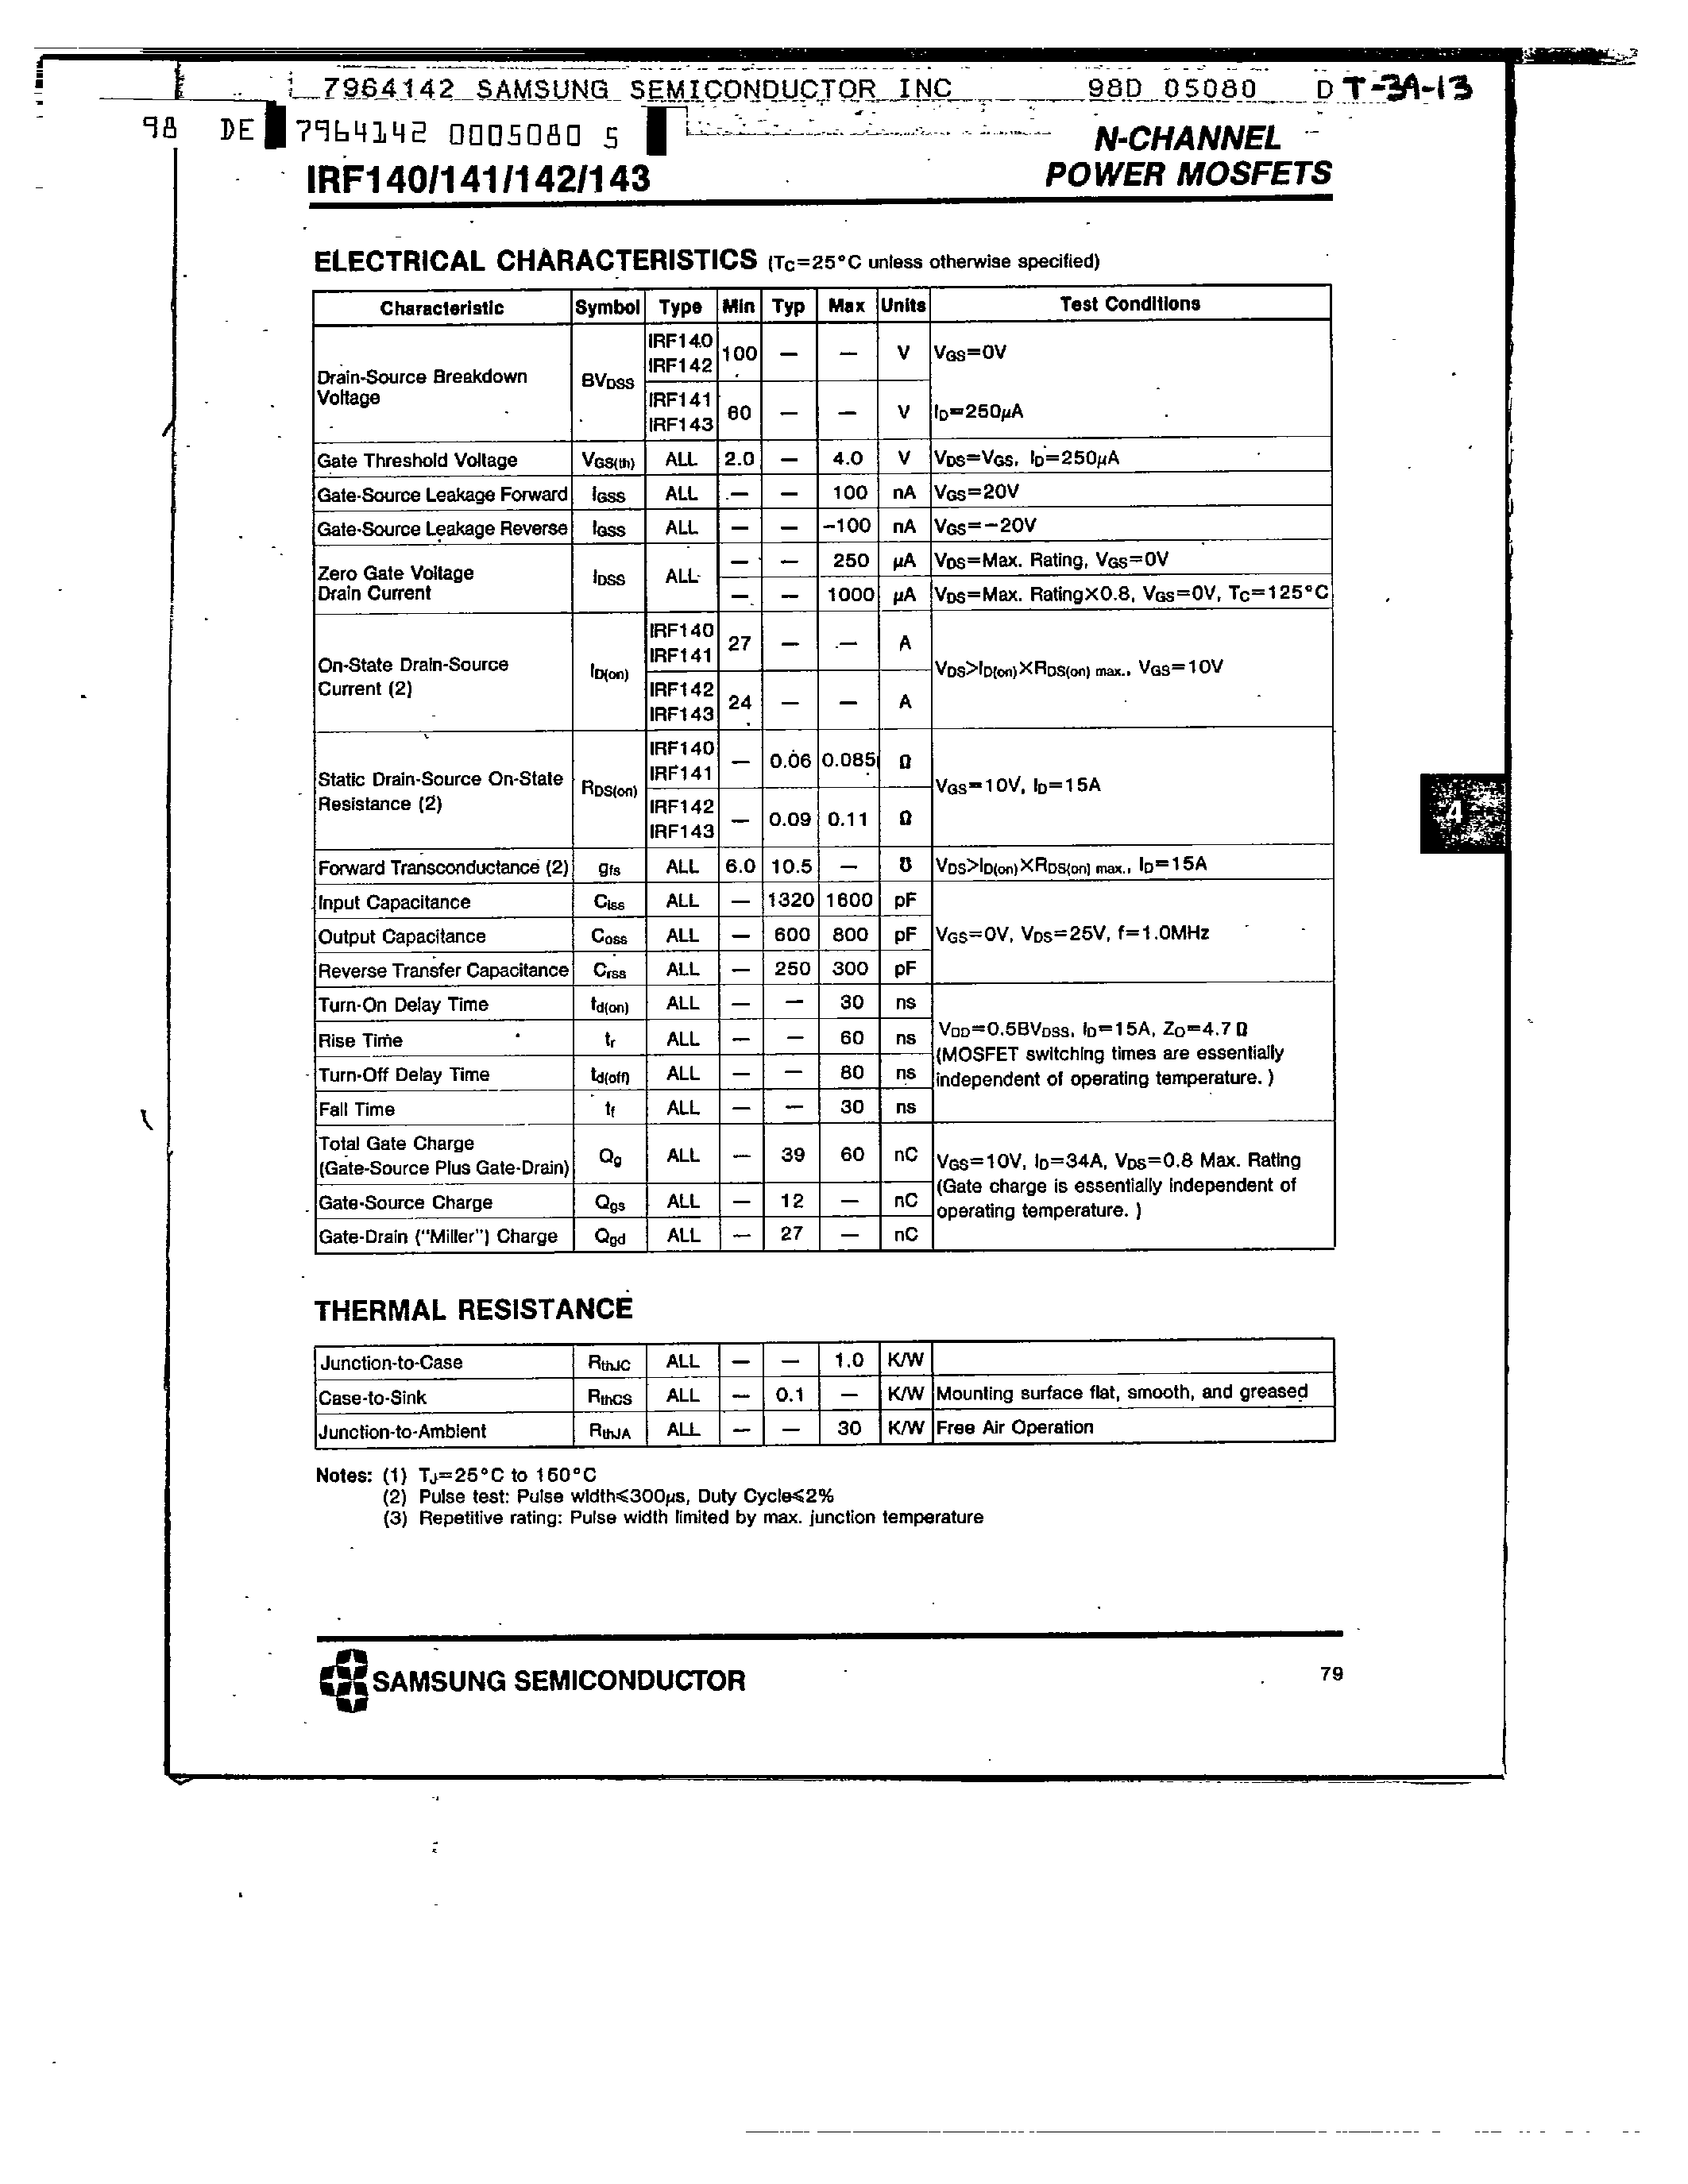 Datasheet IRF143 - N-CHANNEL POWER MOSFETS page 2